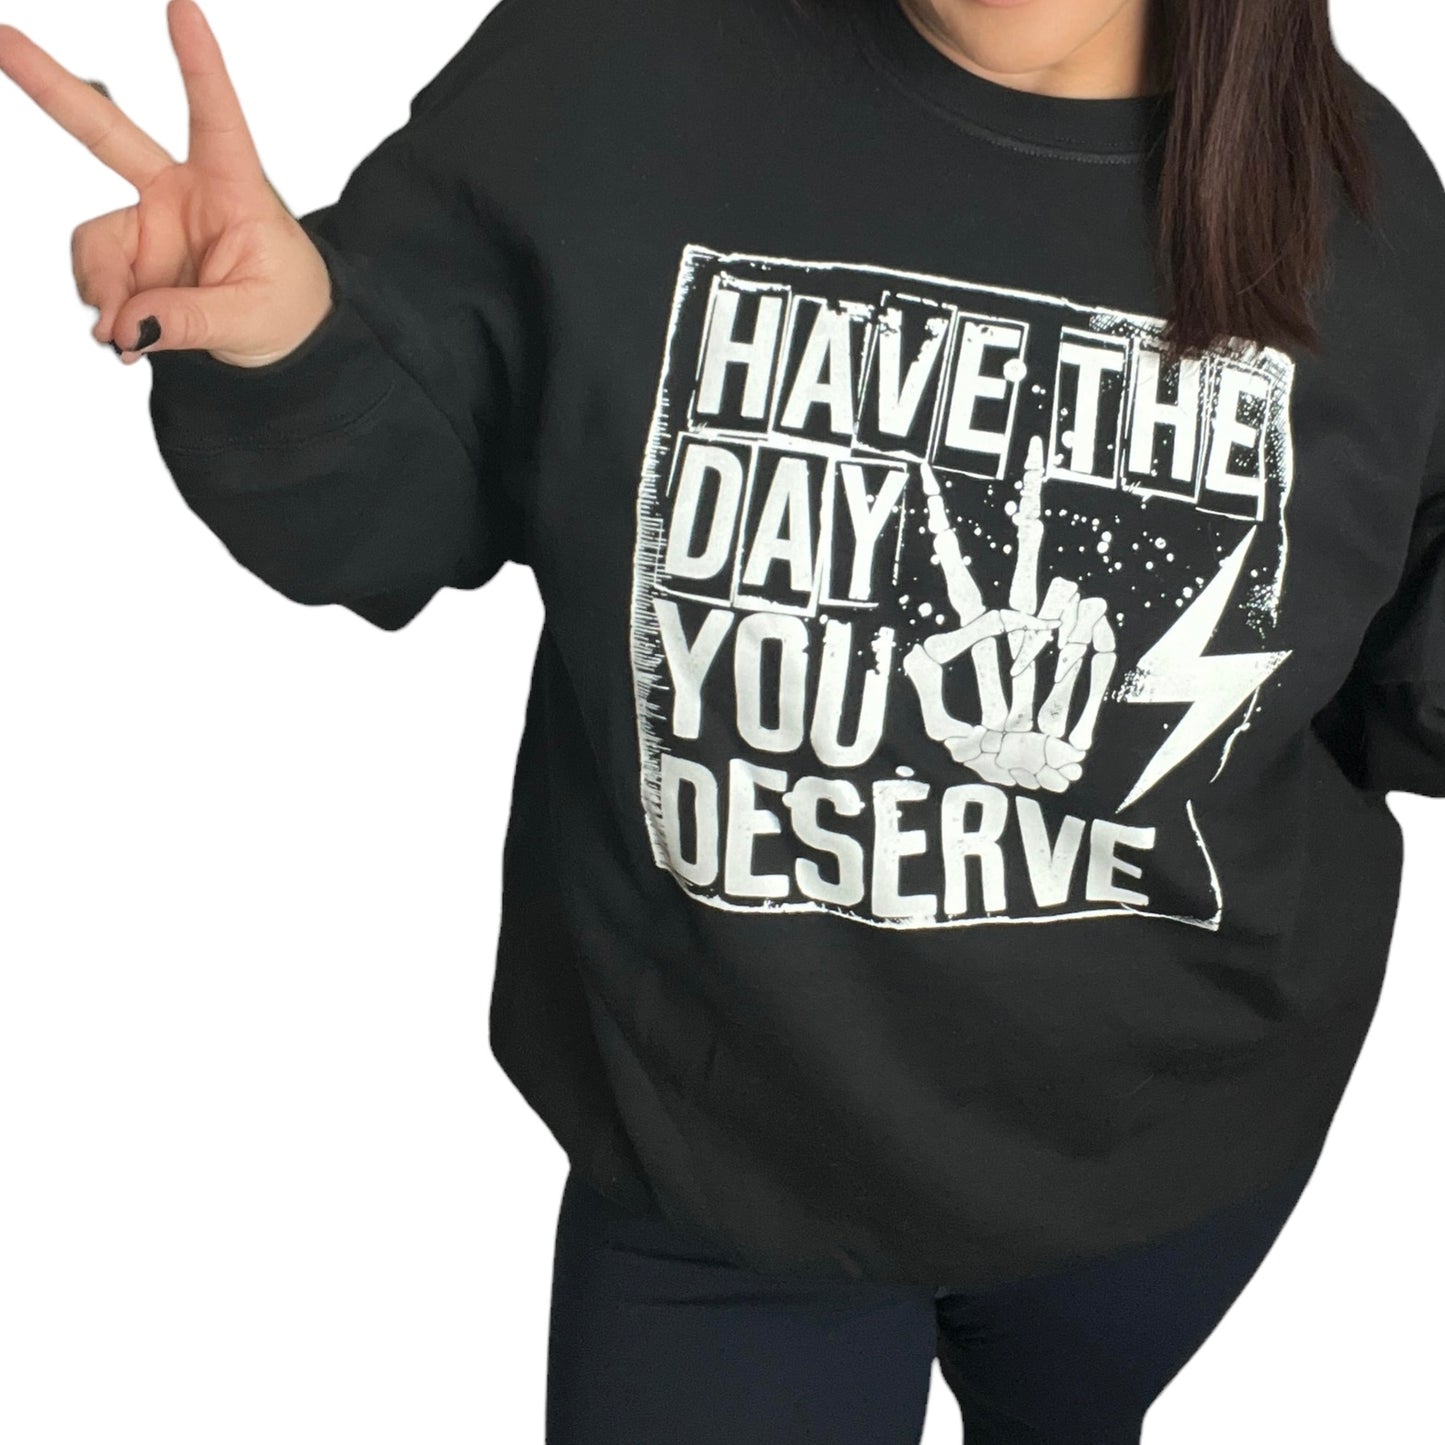 Have the Day You Deserve Black Sweatshirt or T Shirt